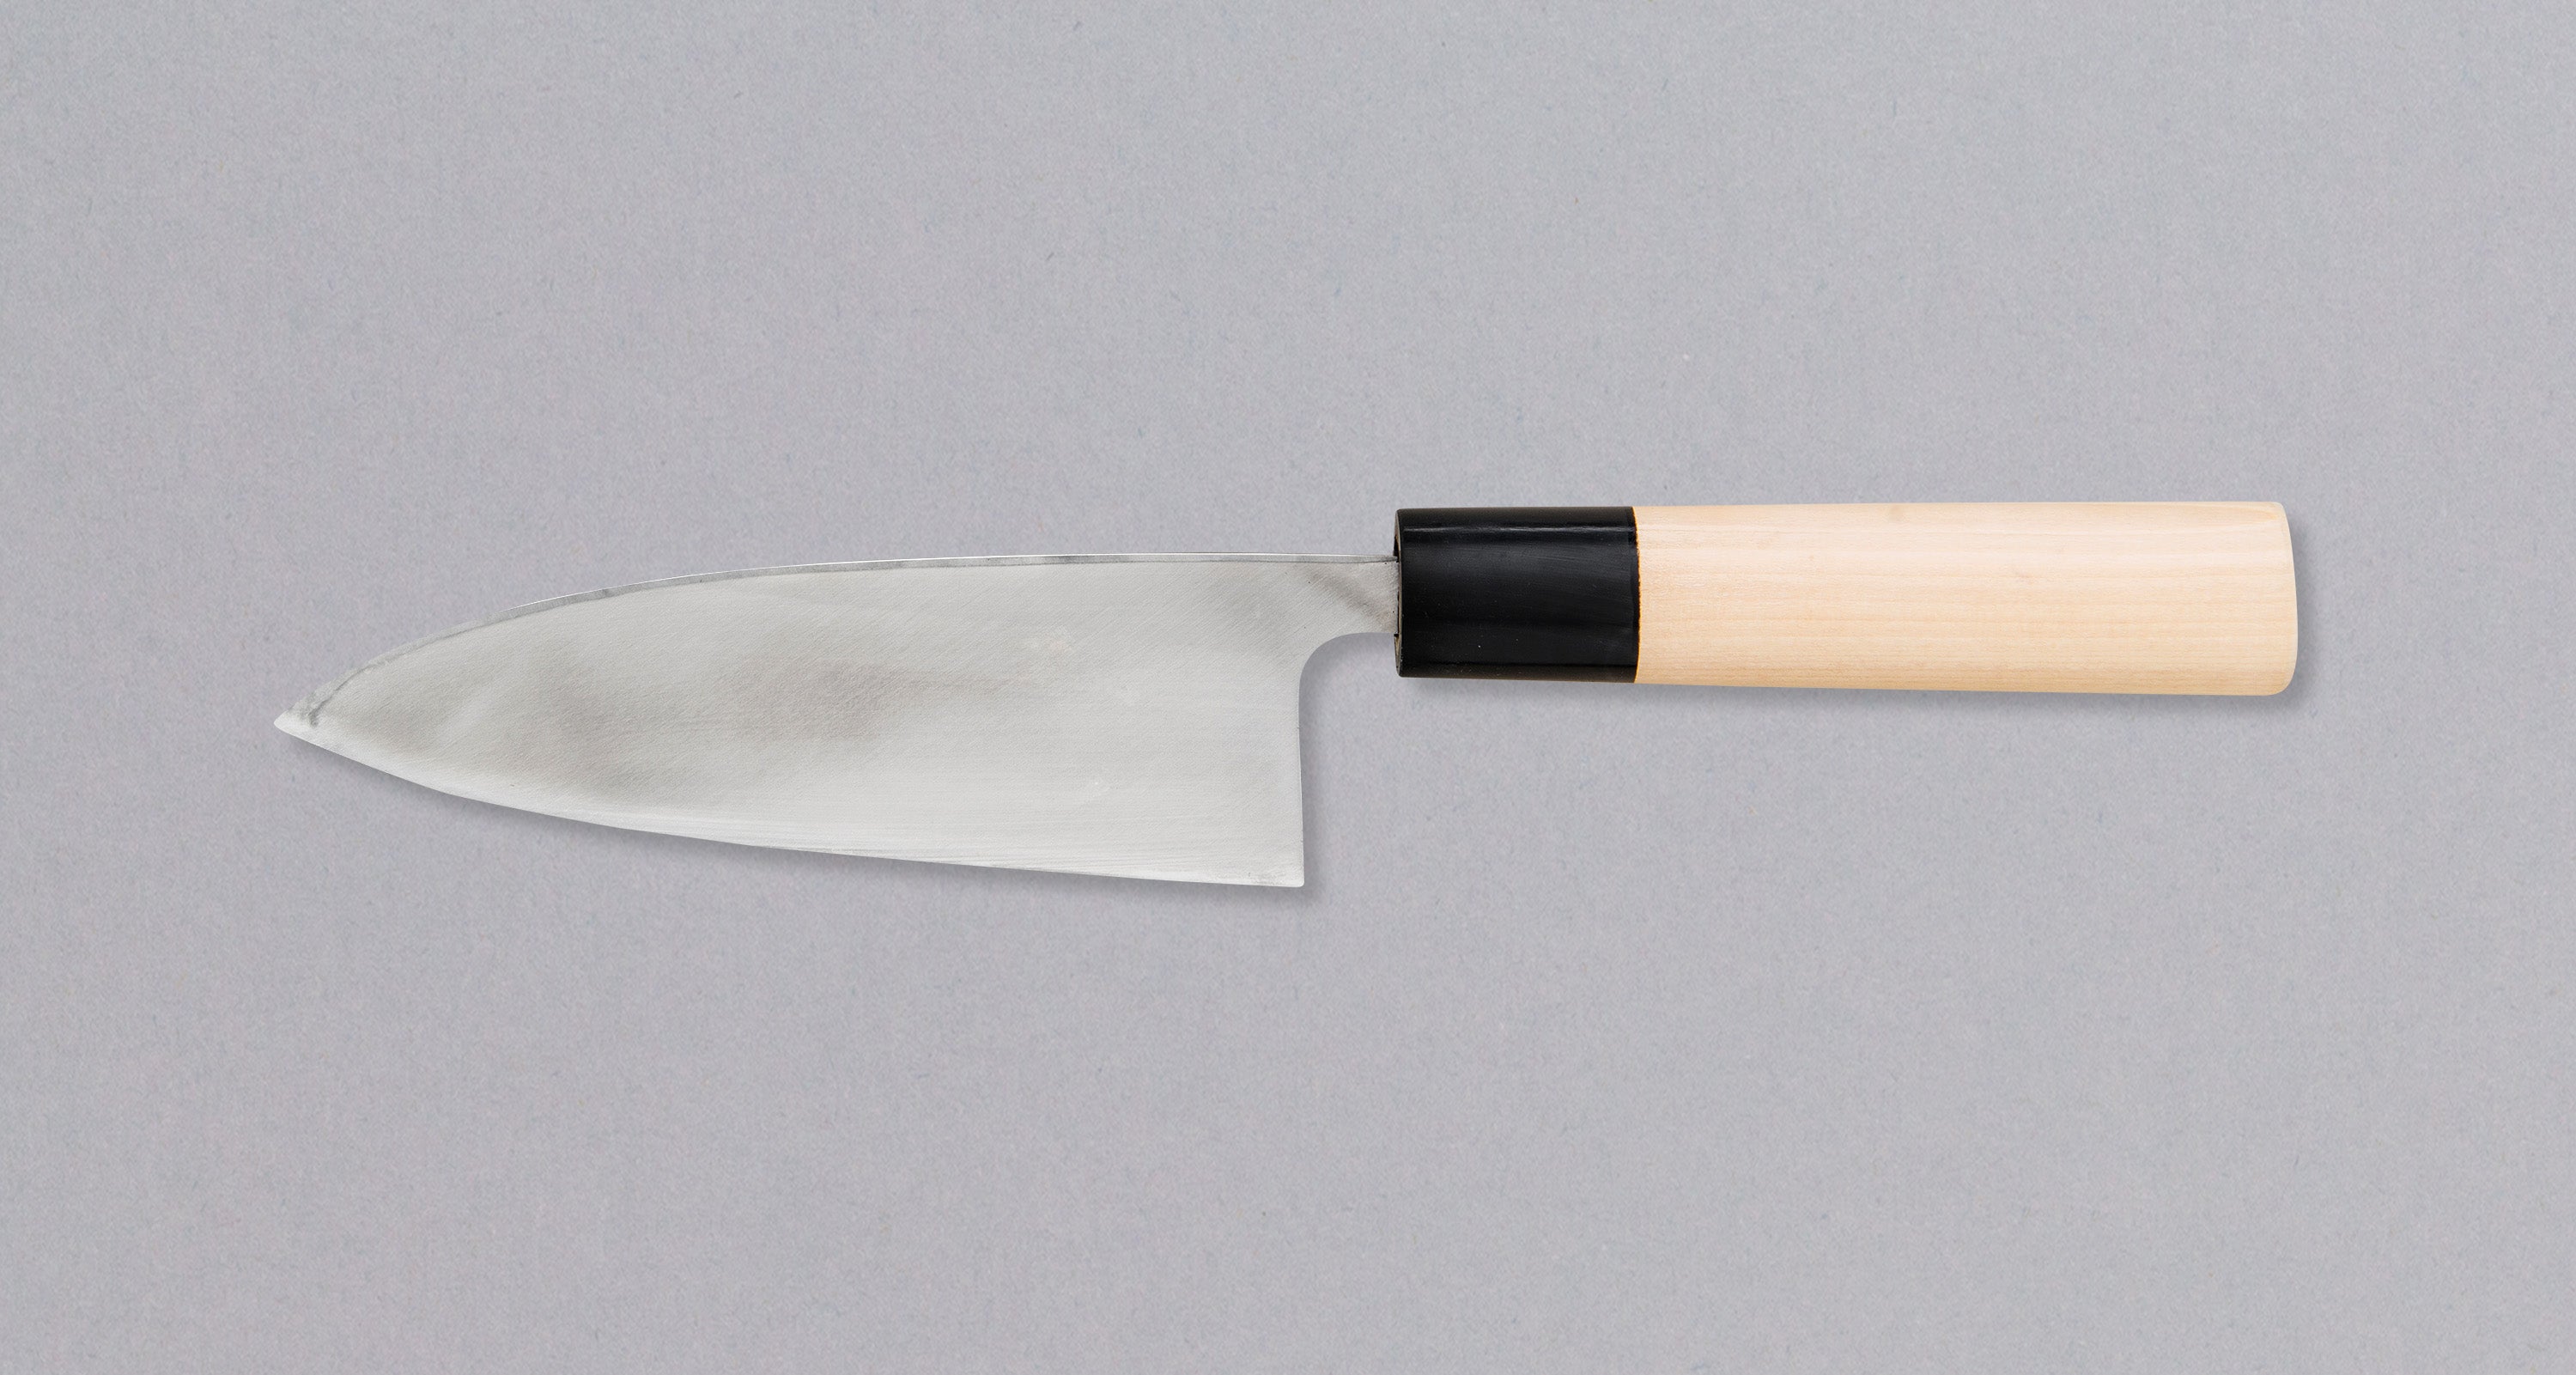 FAQ: Which are the better kitchen knives -- German or Japanese